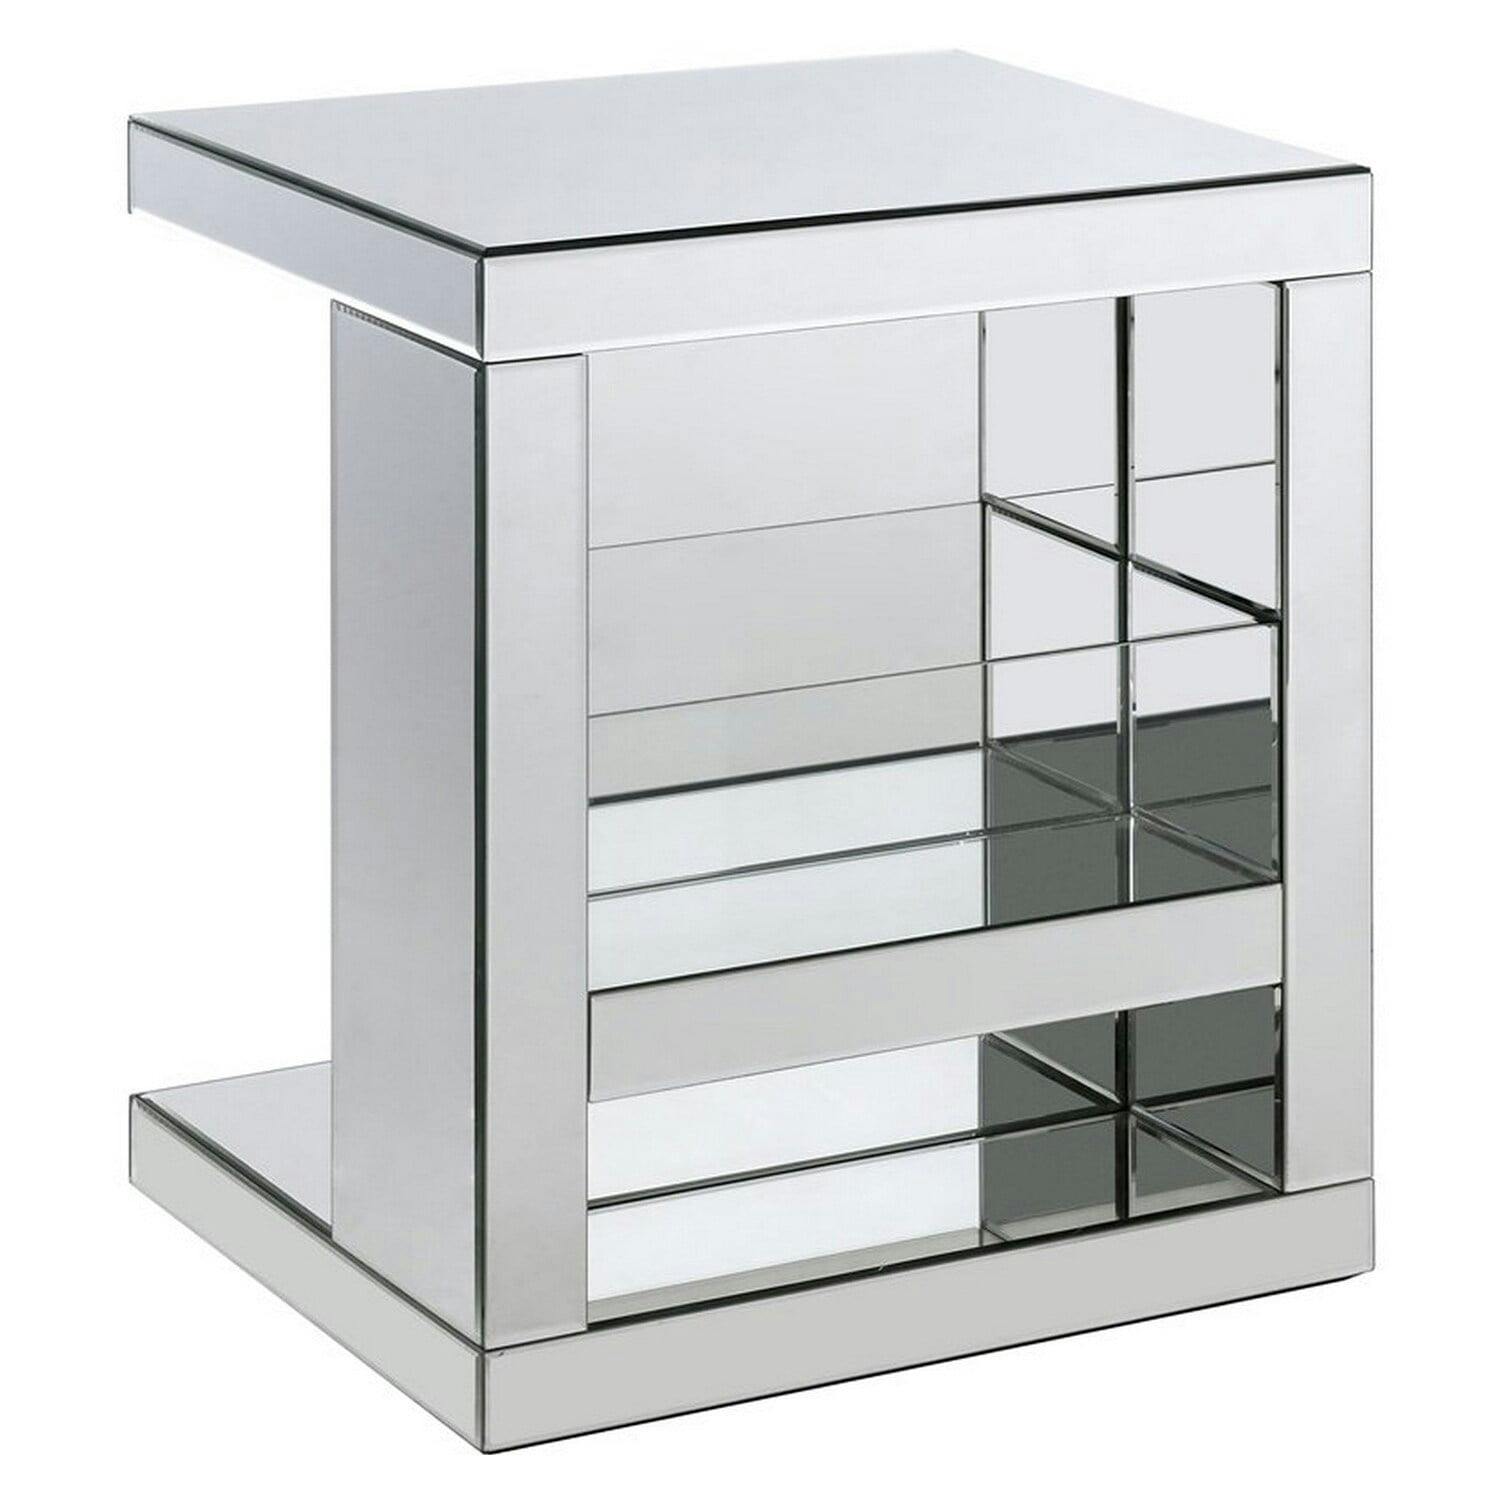 C-Shaped Silver Wood and Glass Mirrored Accent Table